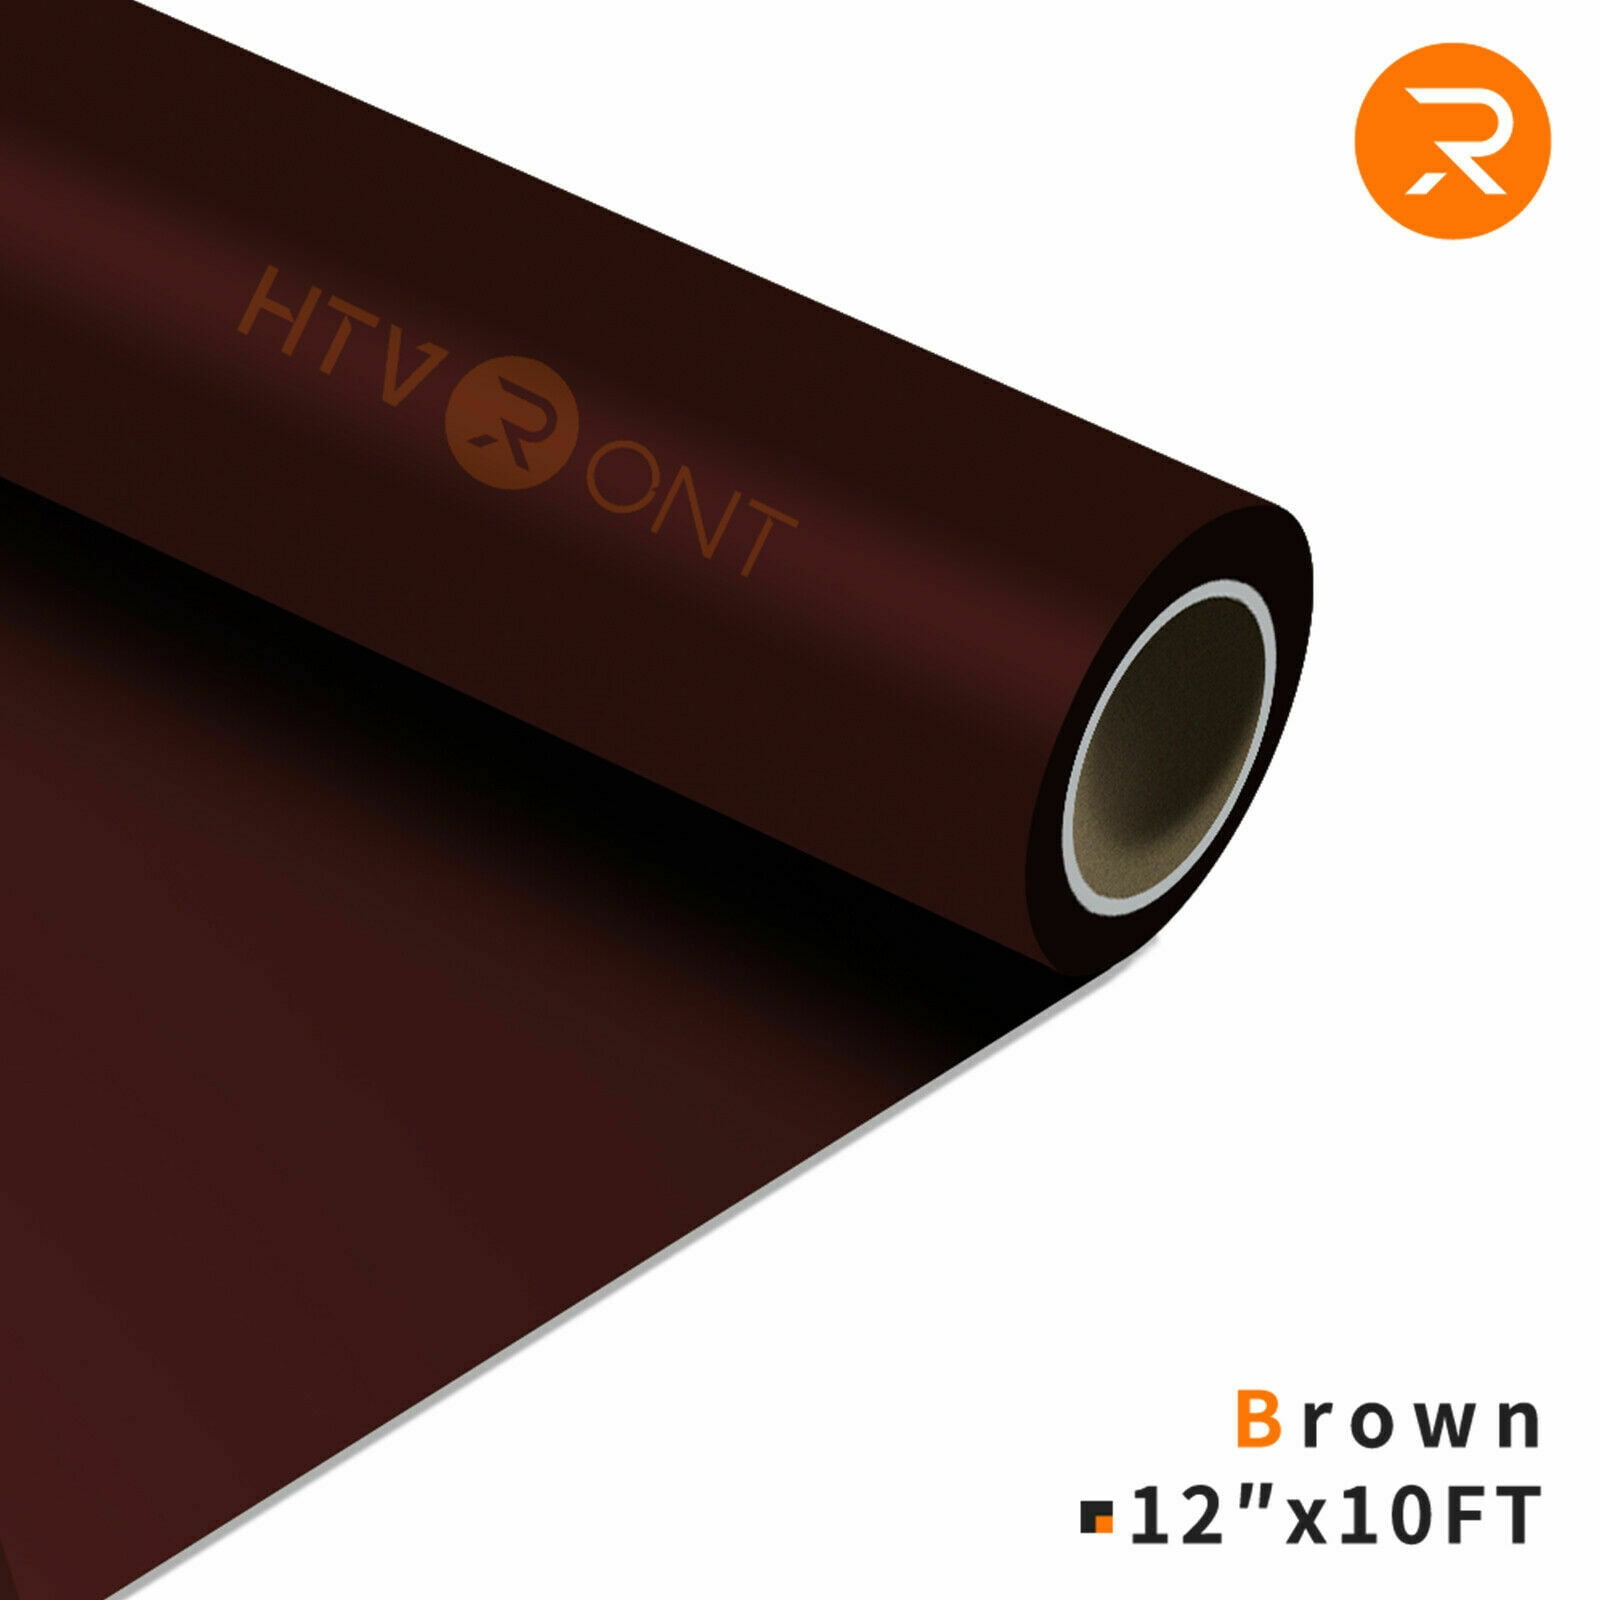 HTVRONT 12 x 10 ft Heat Transfer Vinyl Rolls - Brown Iron on Vinyl for  Shirts Easy to Cut & Weed 